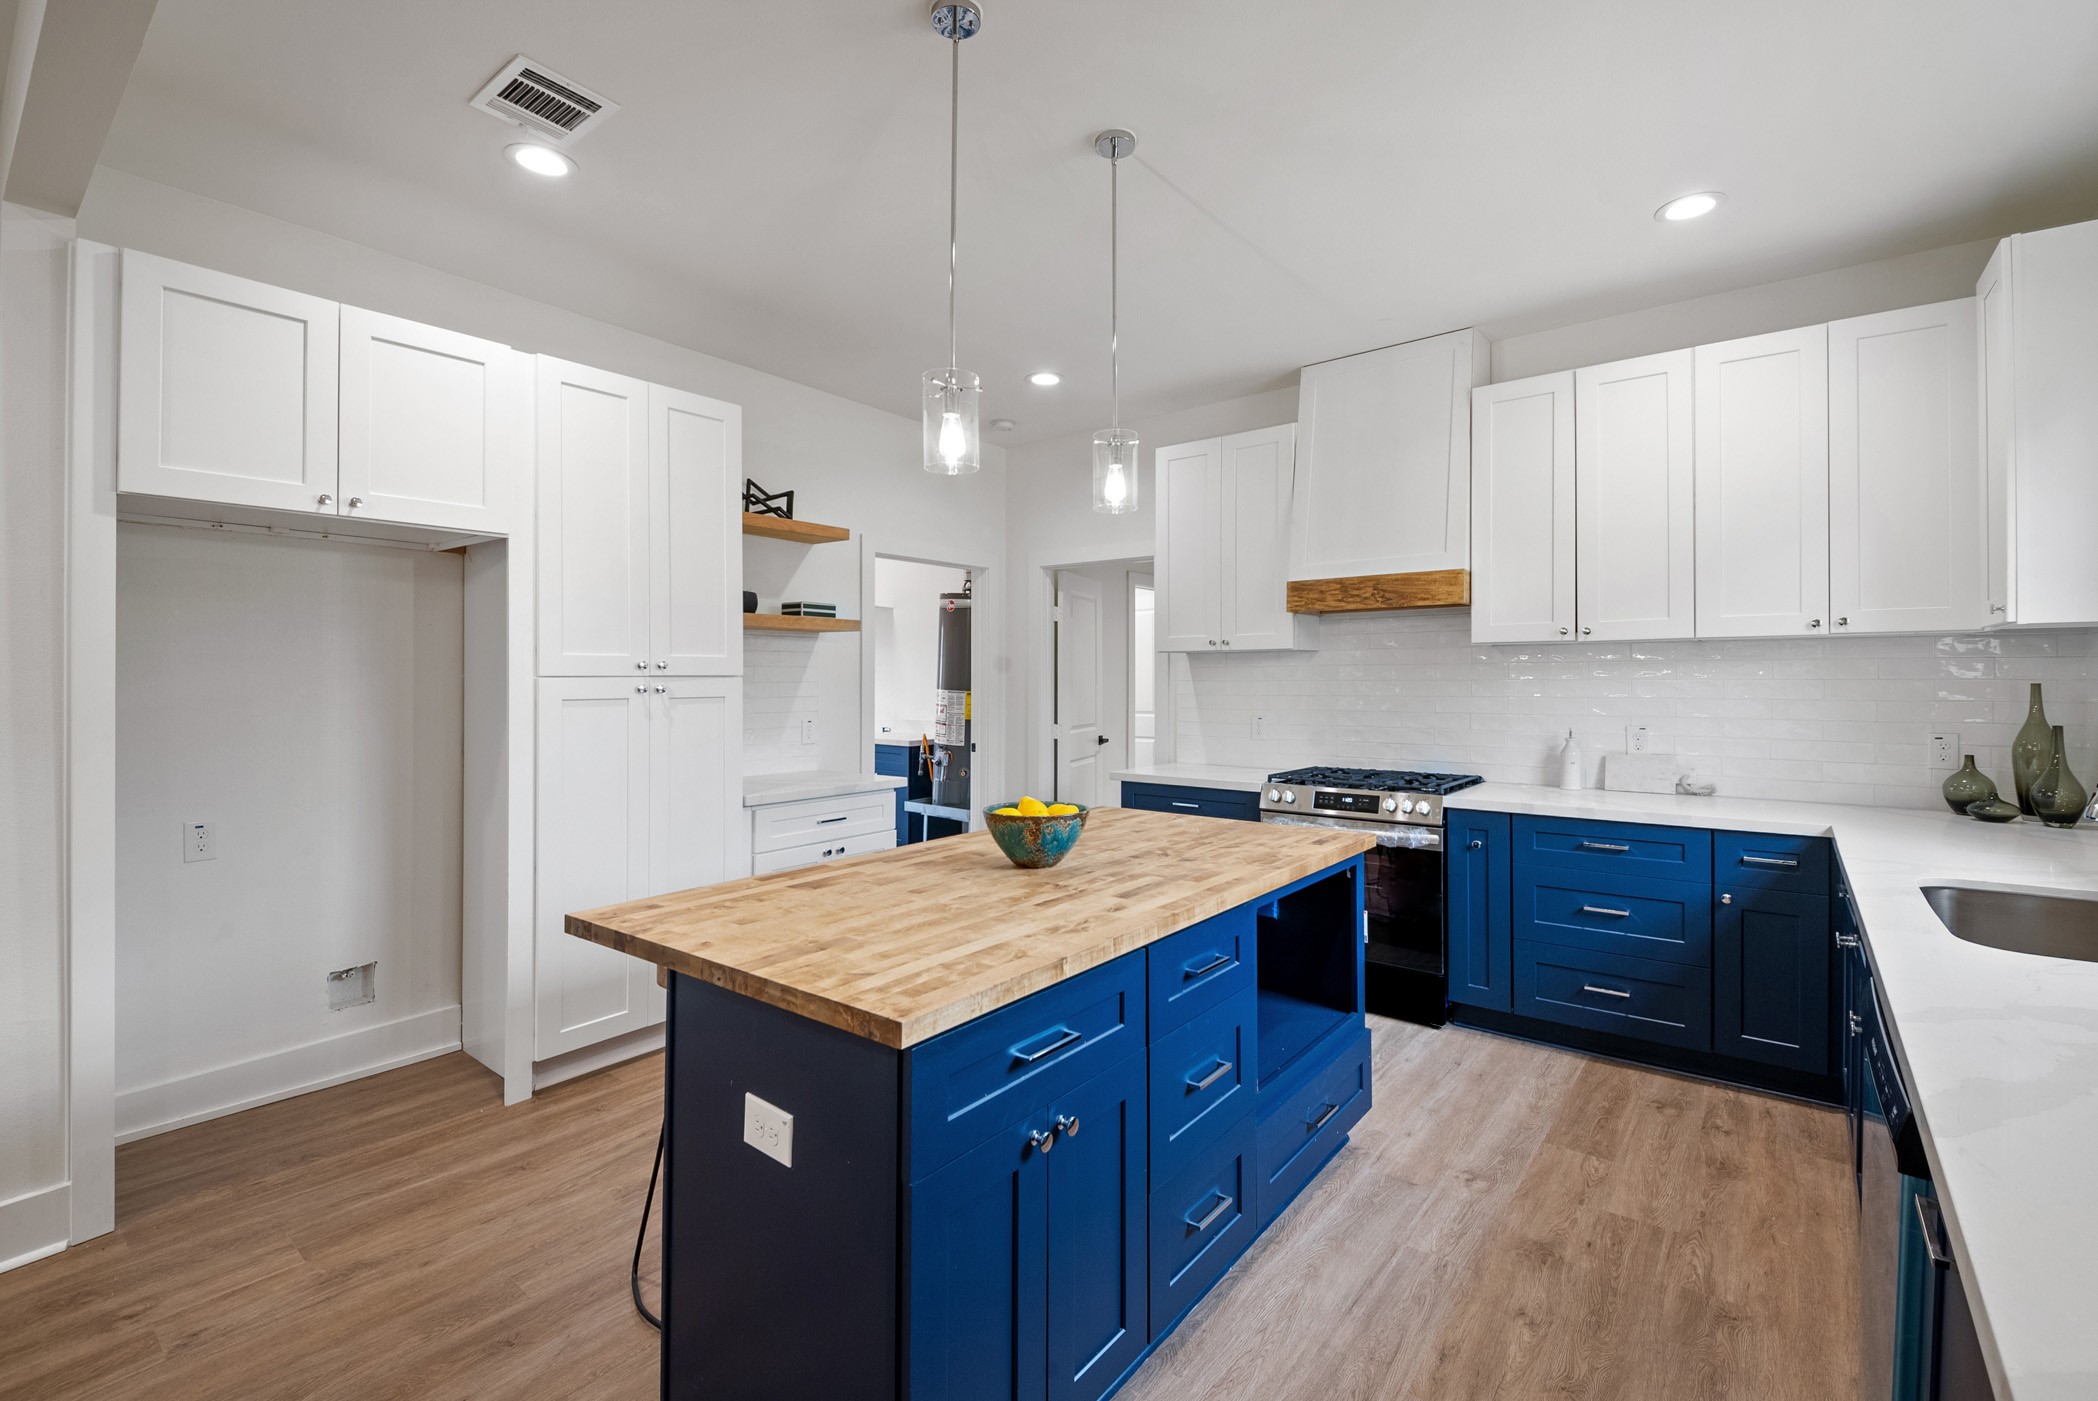 Embracing the soothing vibes of a blue island oasis and surrounded by the warmth of wood grain island top, this kitchen is a blend of modern convenience and rustic charm. Island has a built-in microwave perfectly nestled in its own space. Cooking never felt so stylish and inviting!